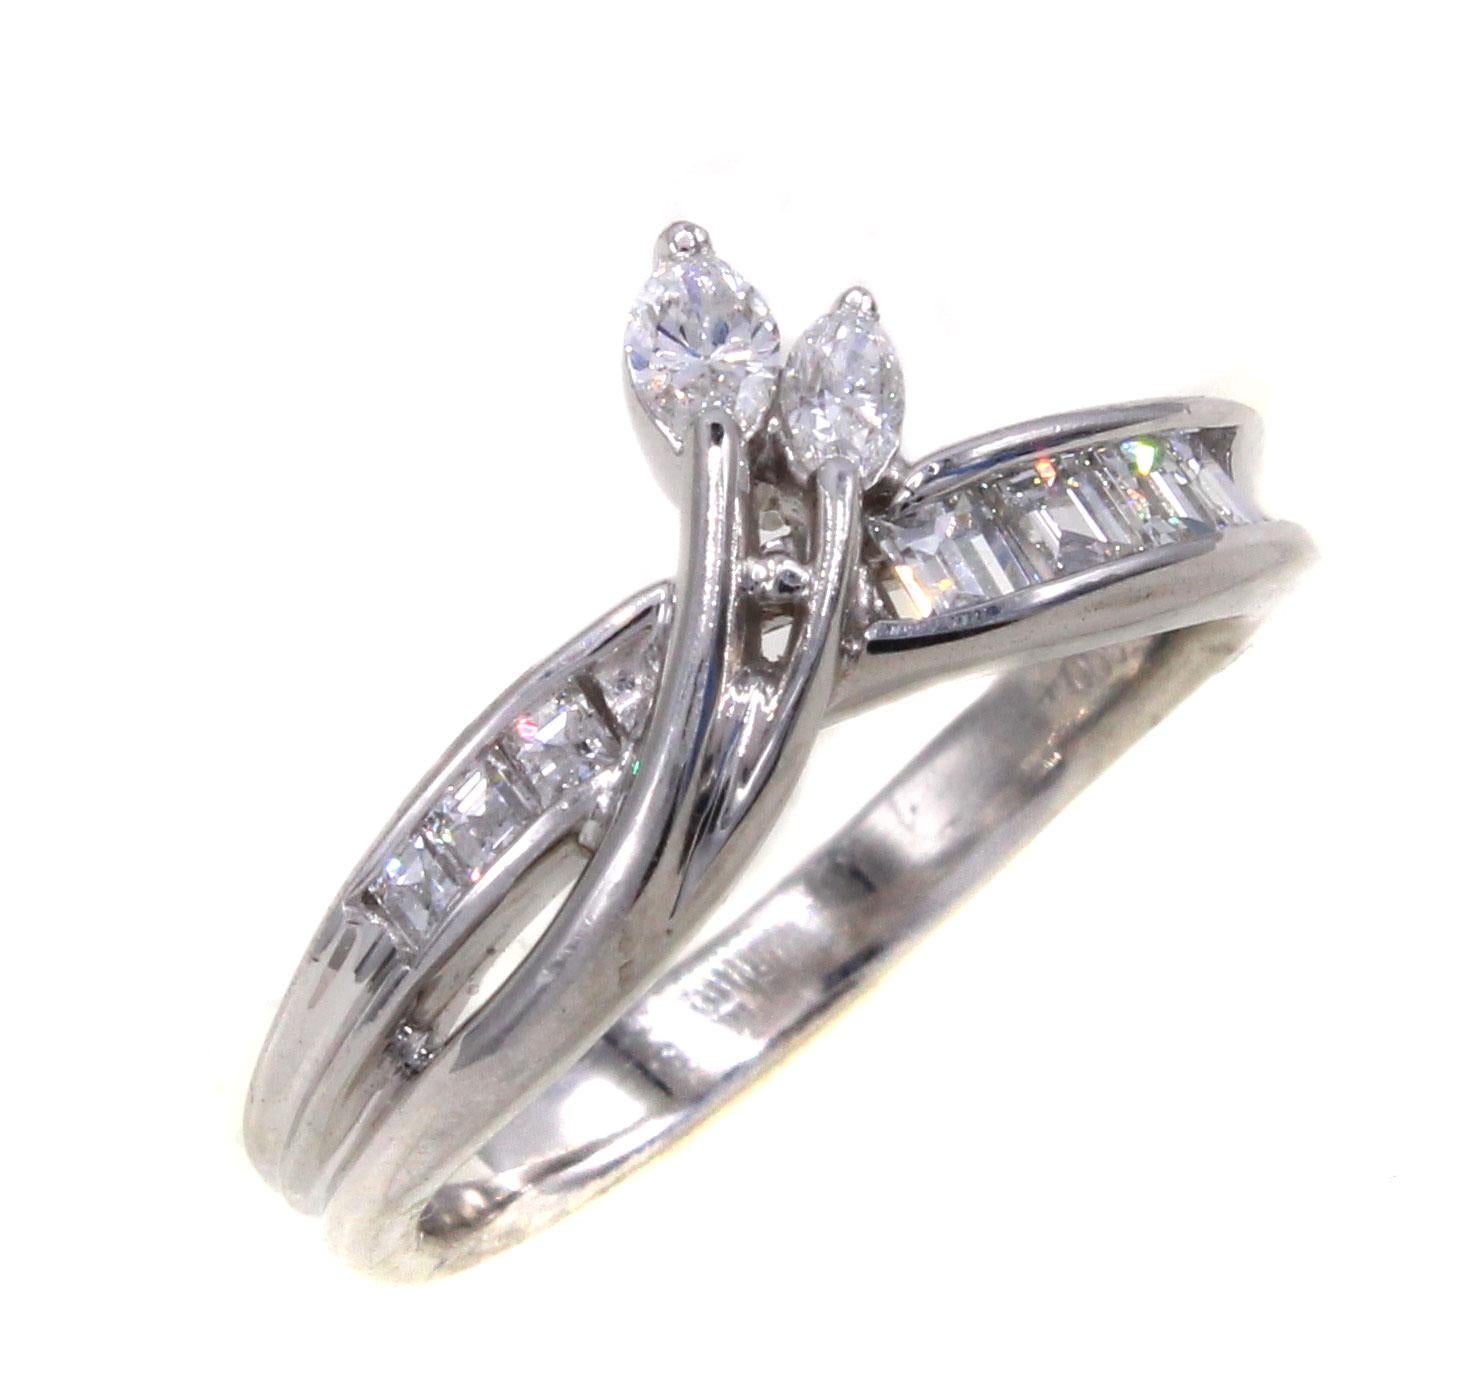 Beautifully designed and masterfully handcrafted this platinum ring has 2 bright white marquis diamonds extending over this band embellished channel set baguette cut diamonds on either side. The total diamond weight is 0.48 carats. Ring size 5, can